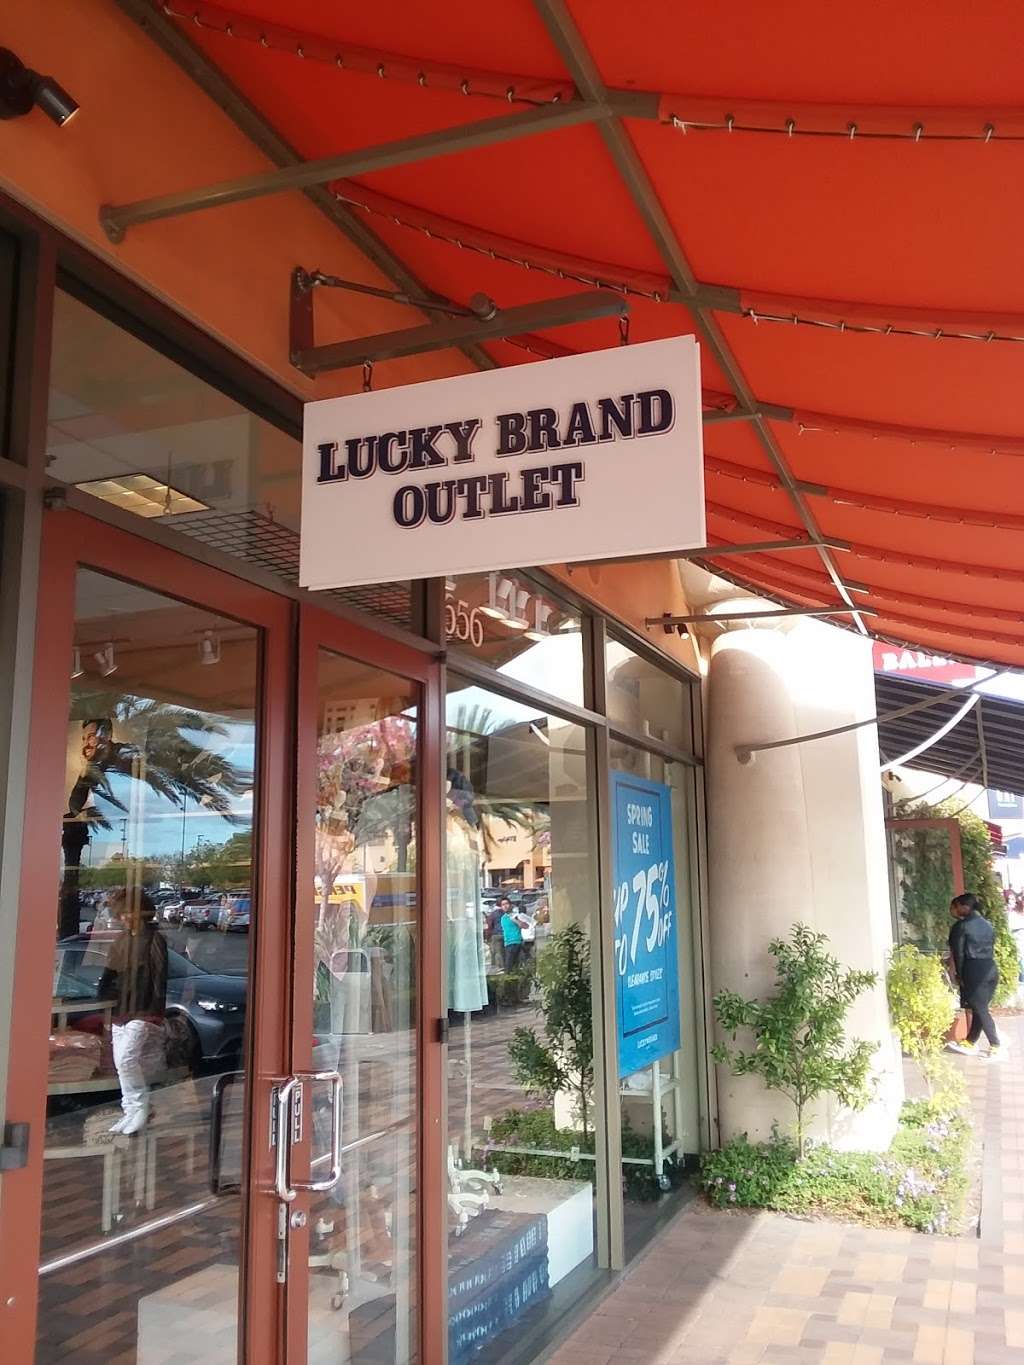 lucky brand locations near me